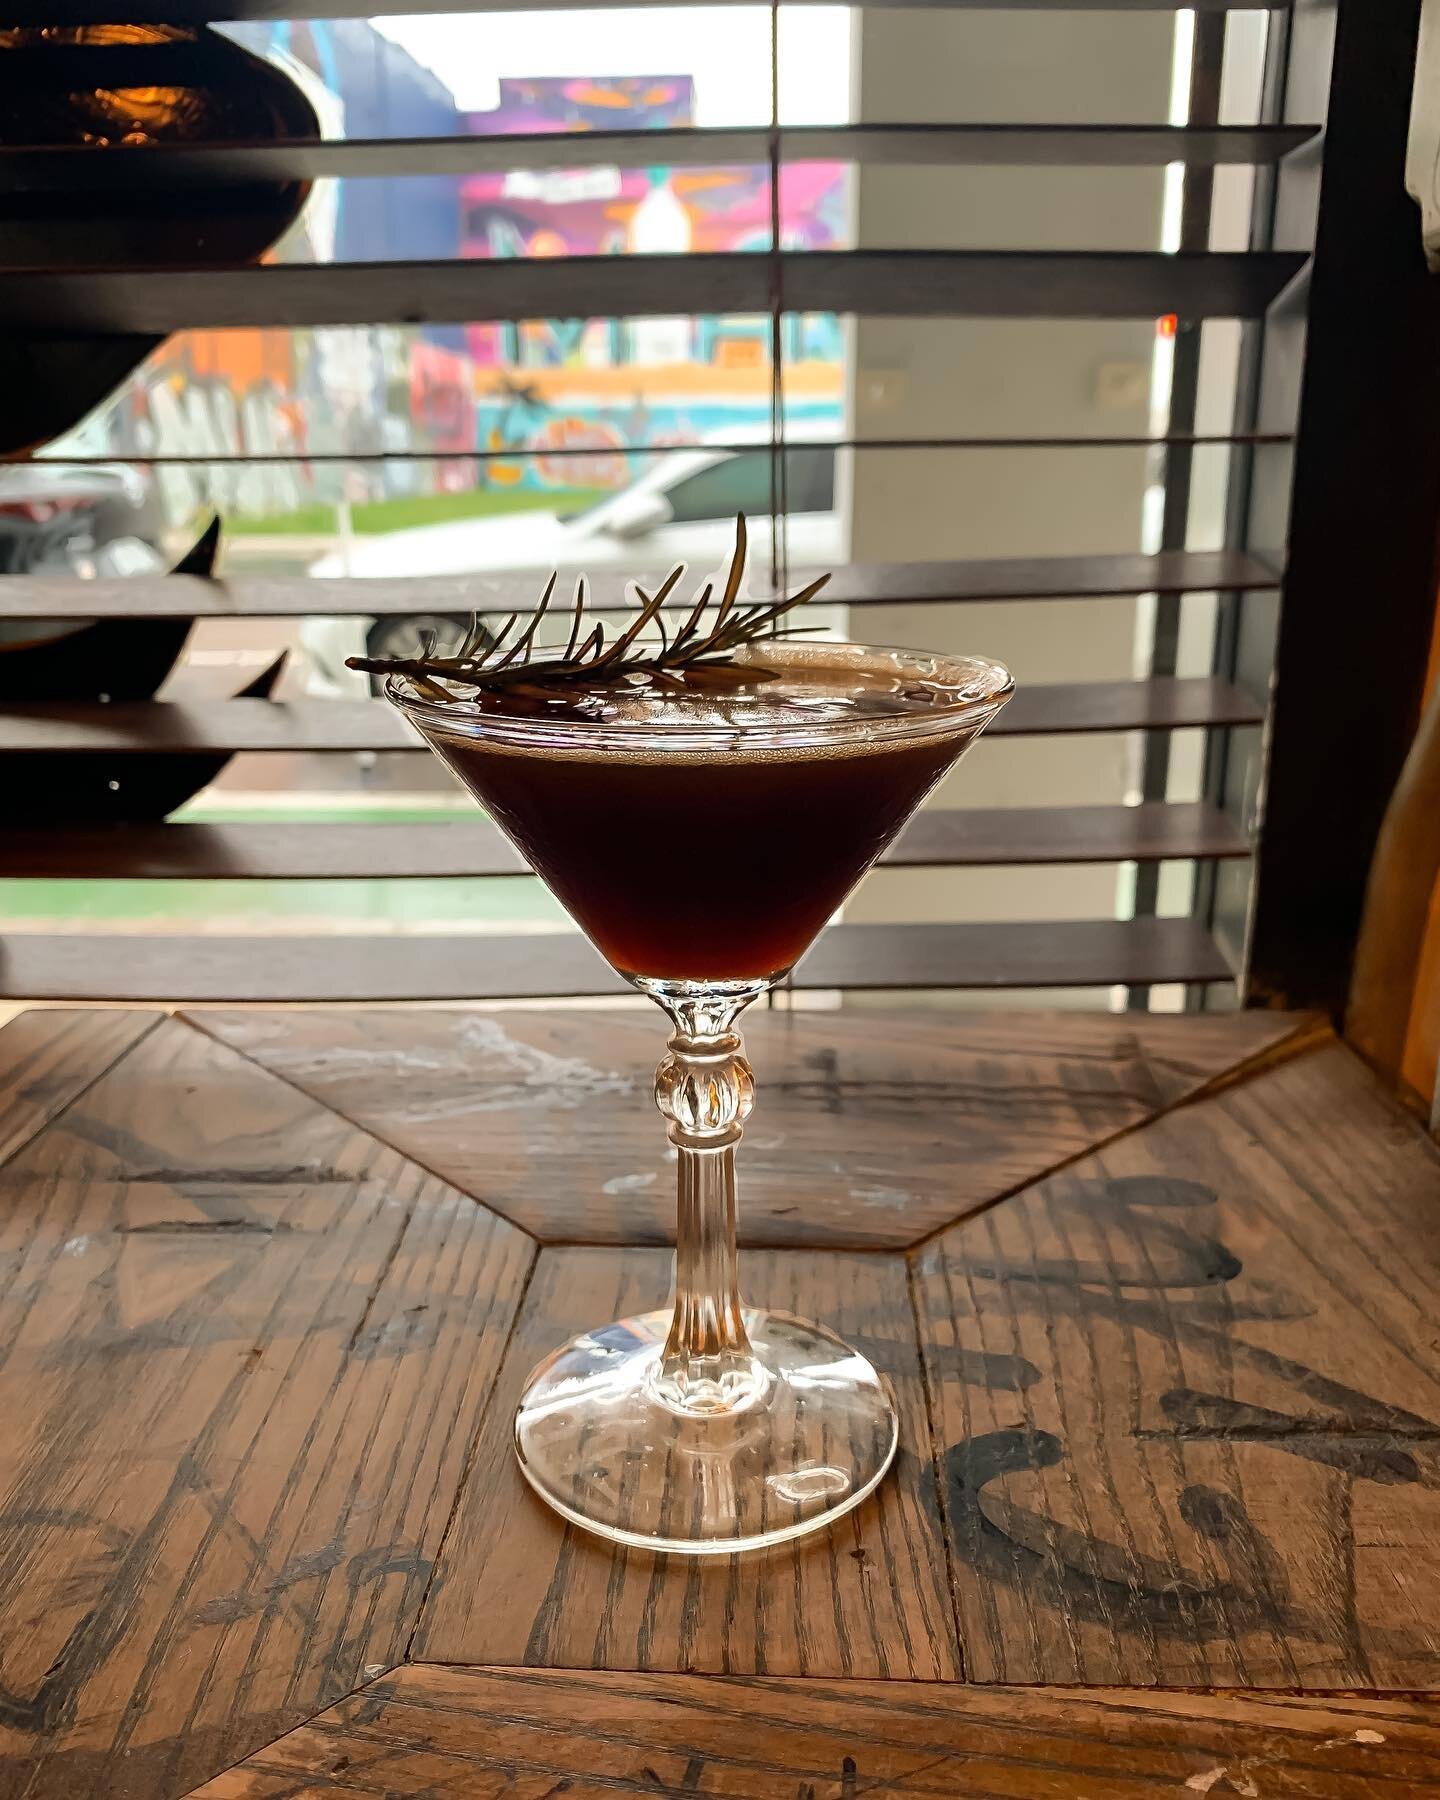 Don&rsquo;t let the rain get you down. Drink our new cocktail of the week while listening to live jazz and cheer up!
&ldquo;Ruby Rhod&rdquo;
Amaro Averna
Guava
Lemon
Boston Bitters
Rosemary